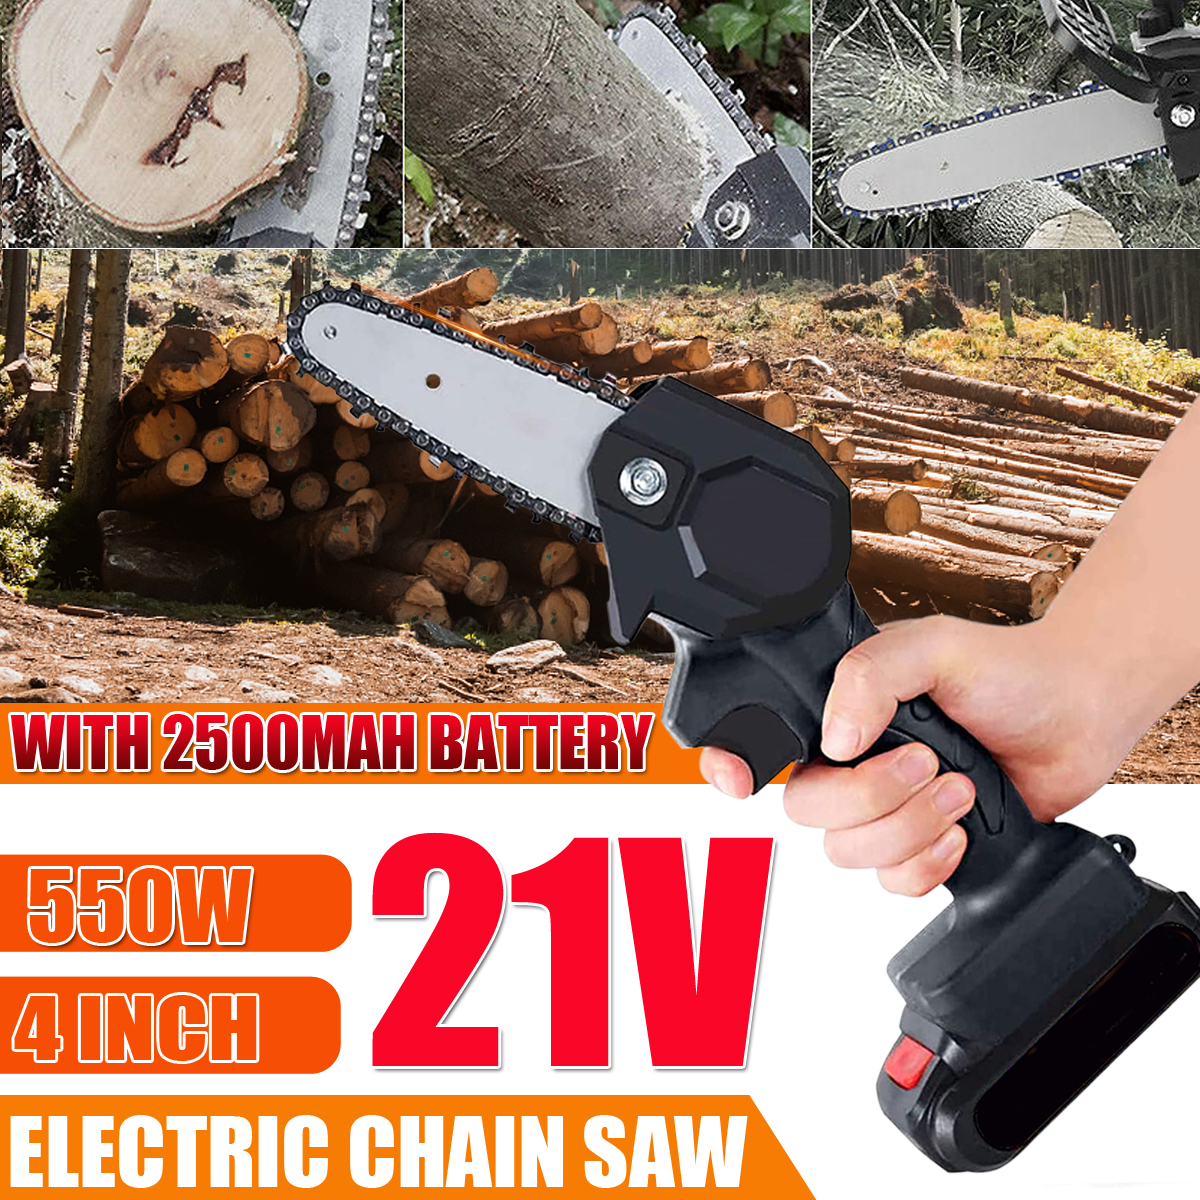 550W-4-Inch-Cordless-Mini-Electric-Chainsaw-Portable-Rechargeable-Woodworking-Saw-For-Makita-21V-Bat-1788180-1